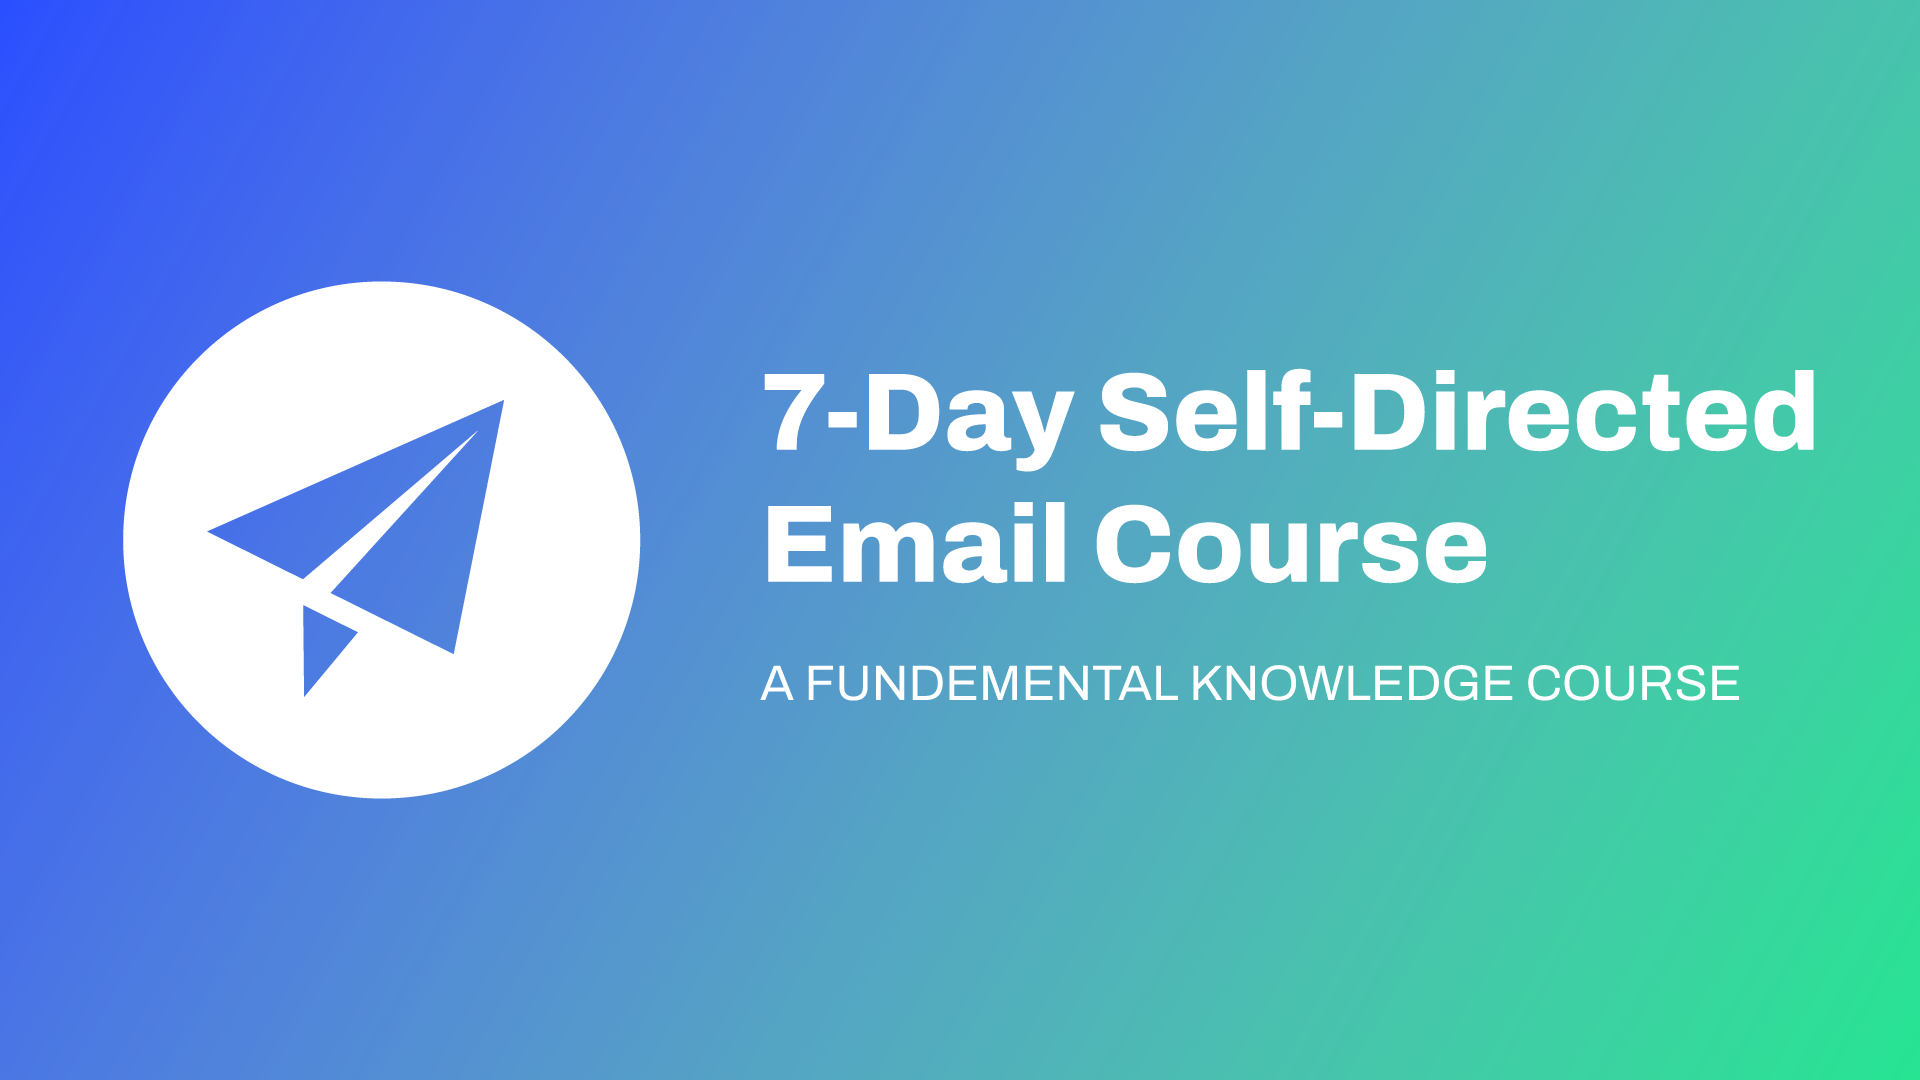 7-Day Self-Directed Email Course